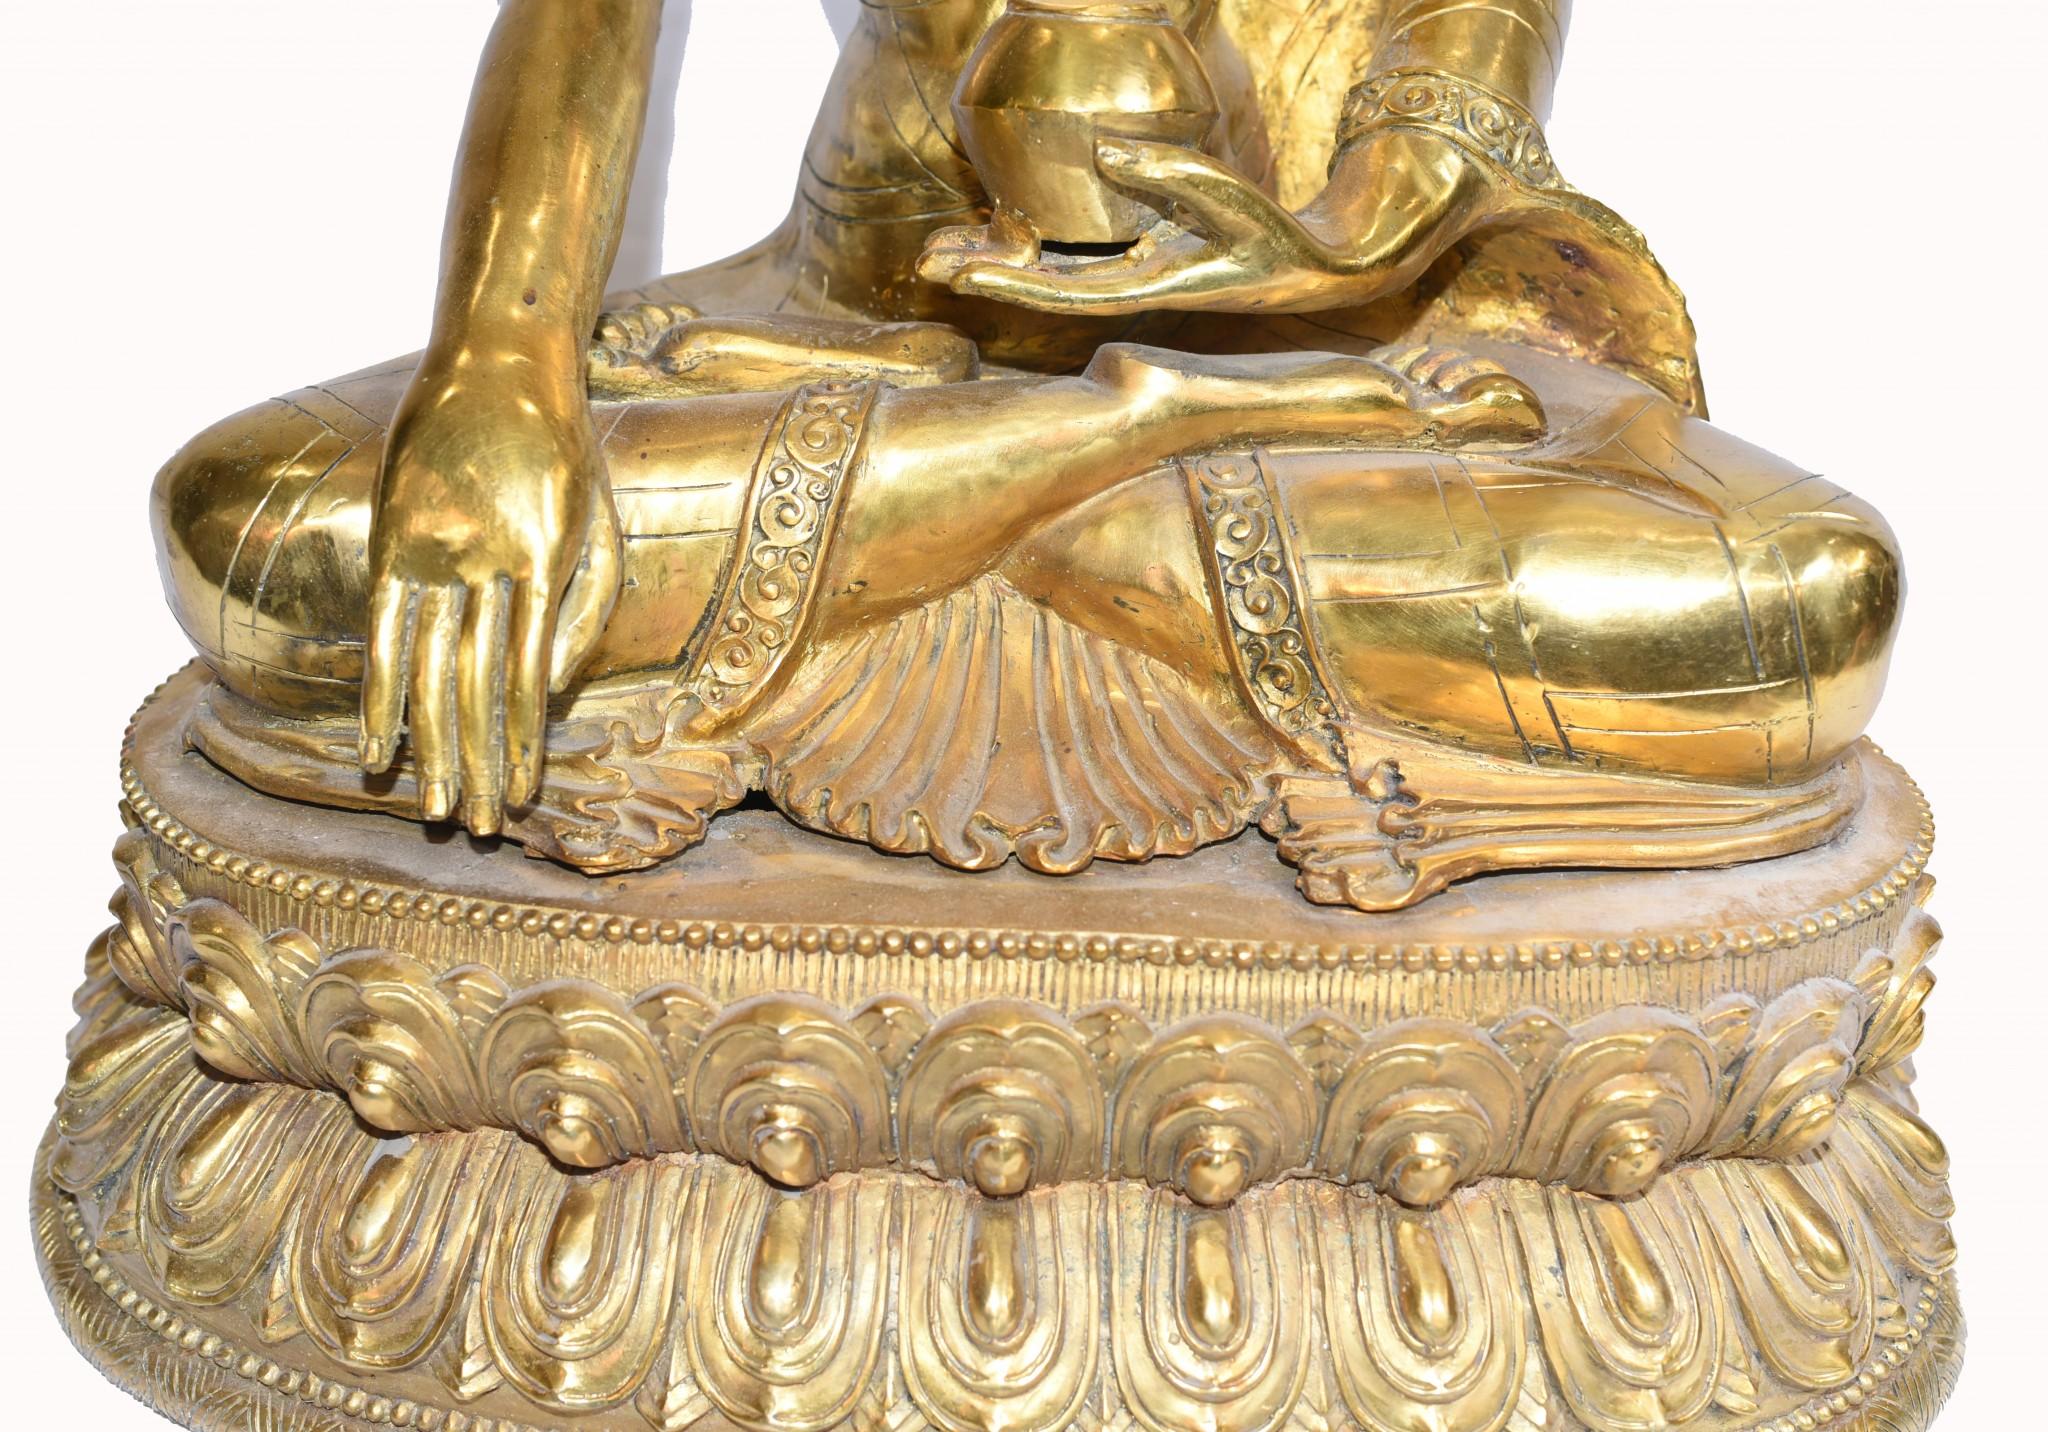 Nepalese Buddha Statue Meditation Casting Lotus Throne Sculpture For Sale 1